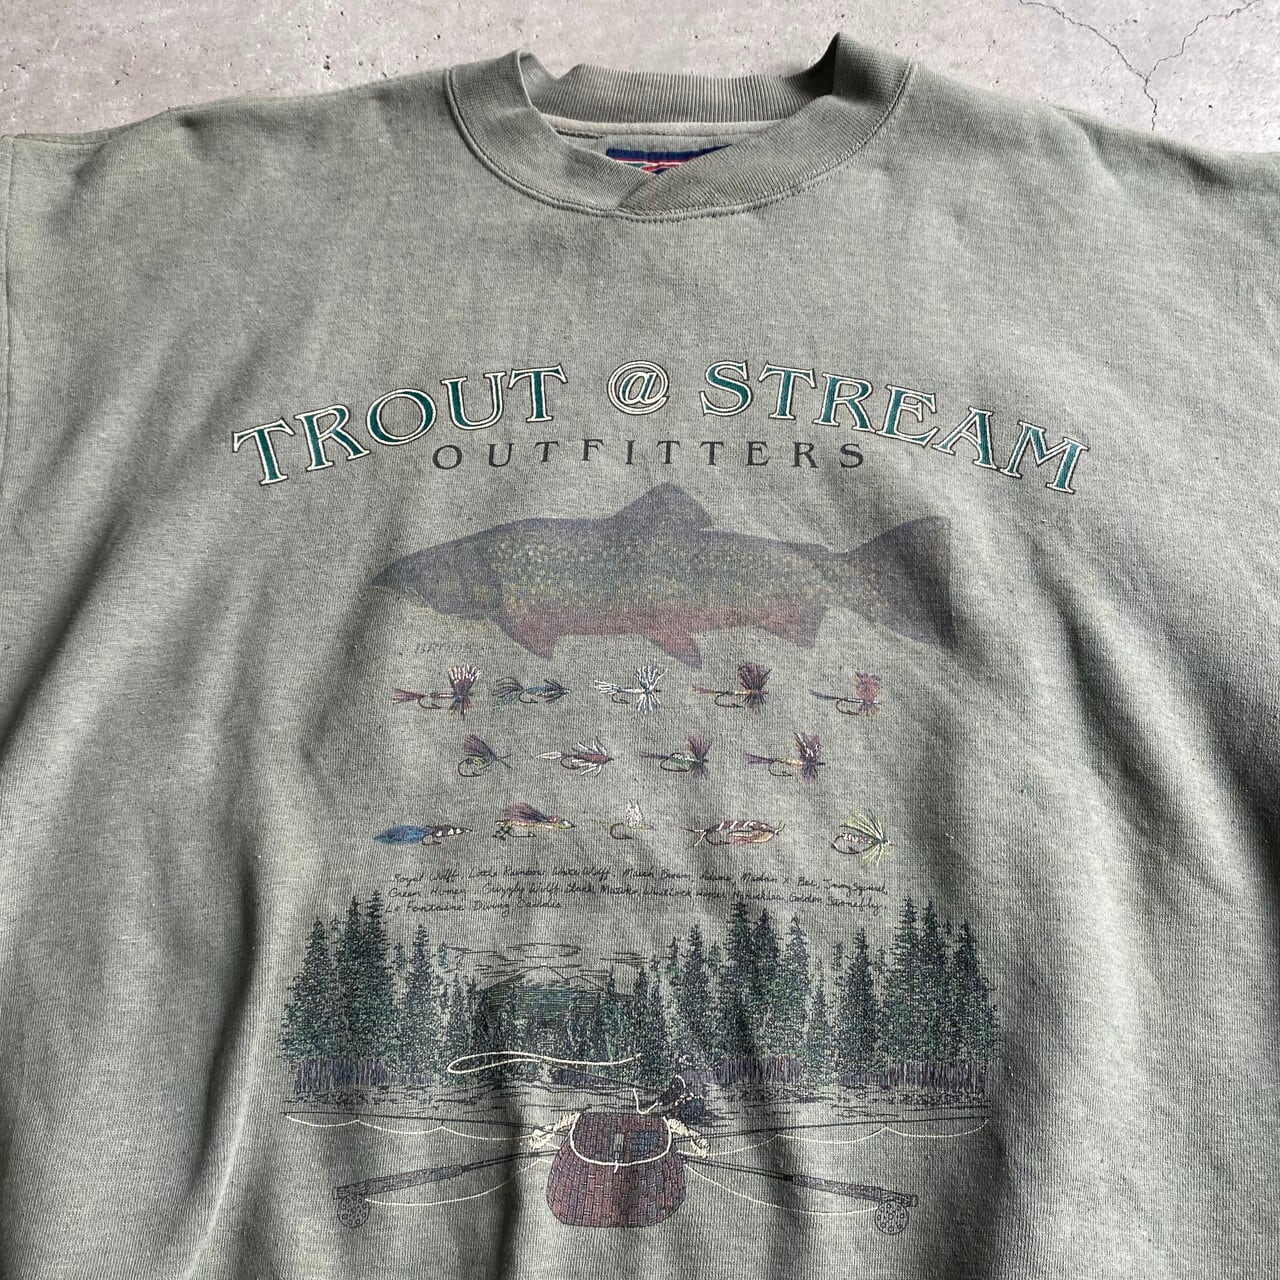 TROUT @ STREAM OUTFITTERS フィッシングプリント スウェットシャツ ...